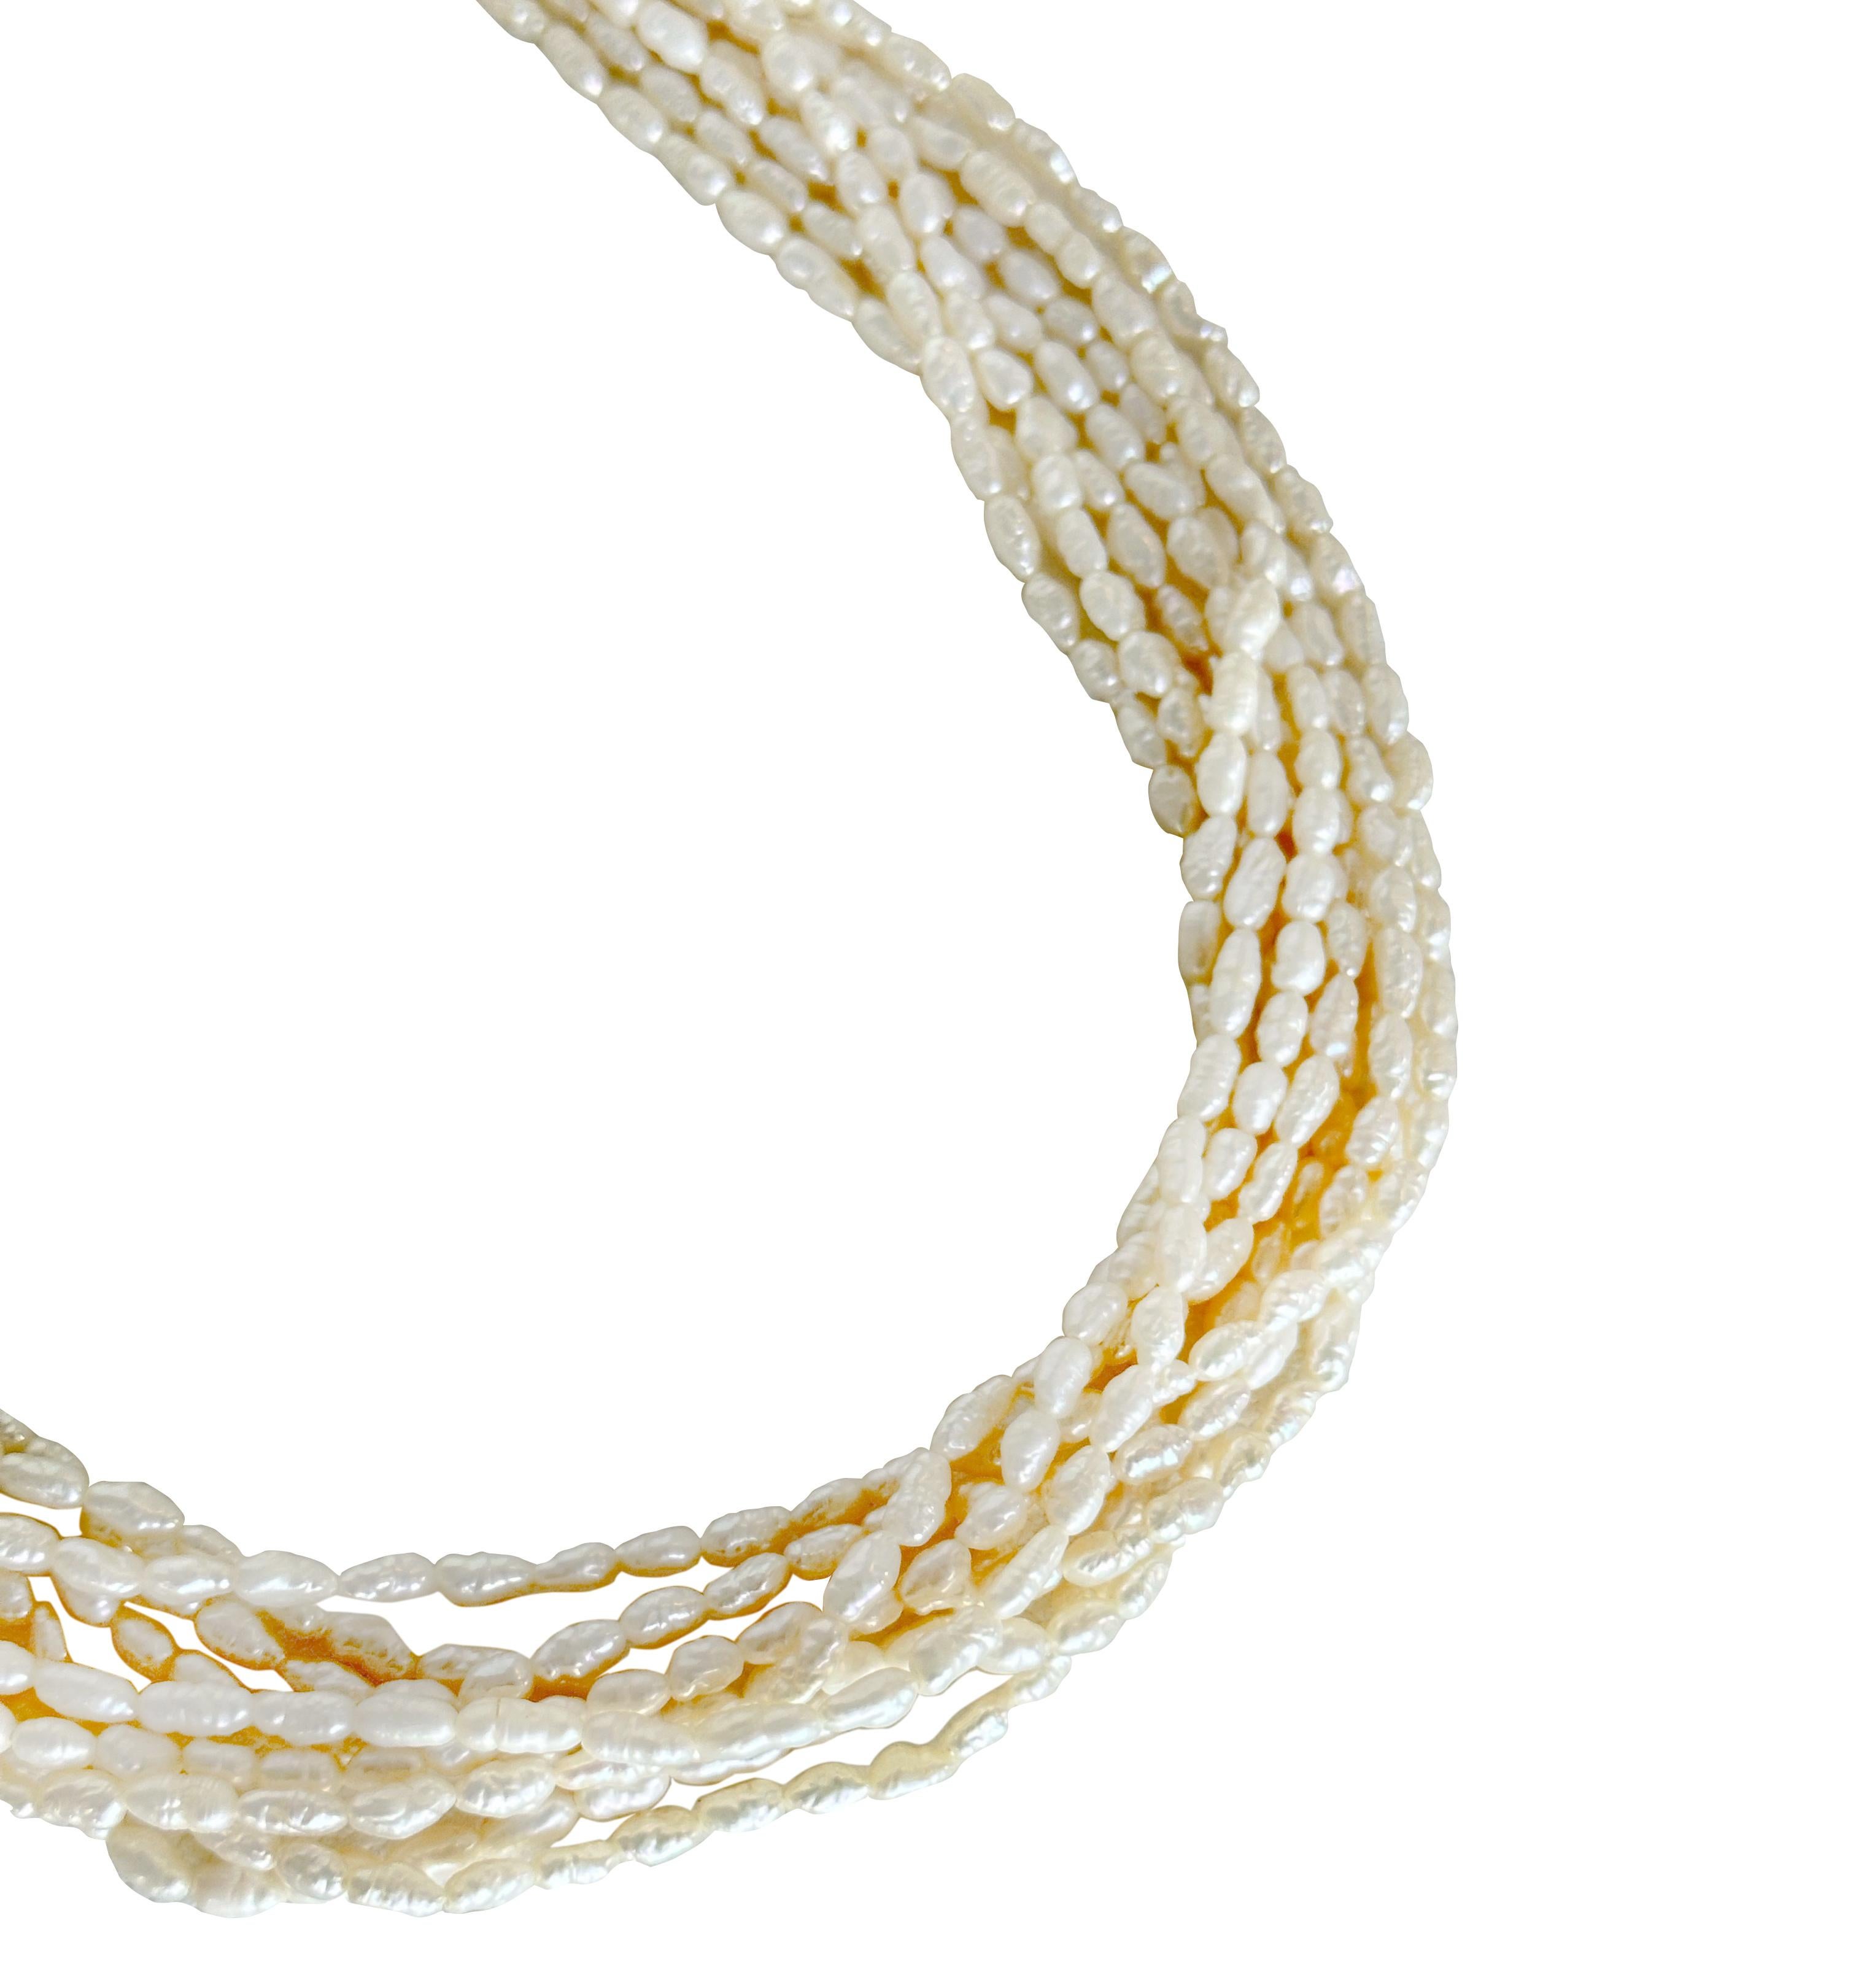 Elegant nine strands of freshwater pearls with a gold clasp, this necklace is perfect for elevating any outfit. Crafted in a classic French baroque style, each pearl is intertwined to create a beautiful and intricate design. 

Measuring 18.5 inches